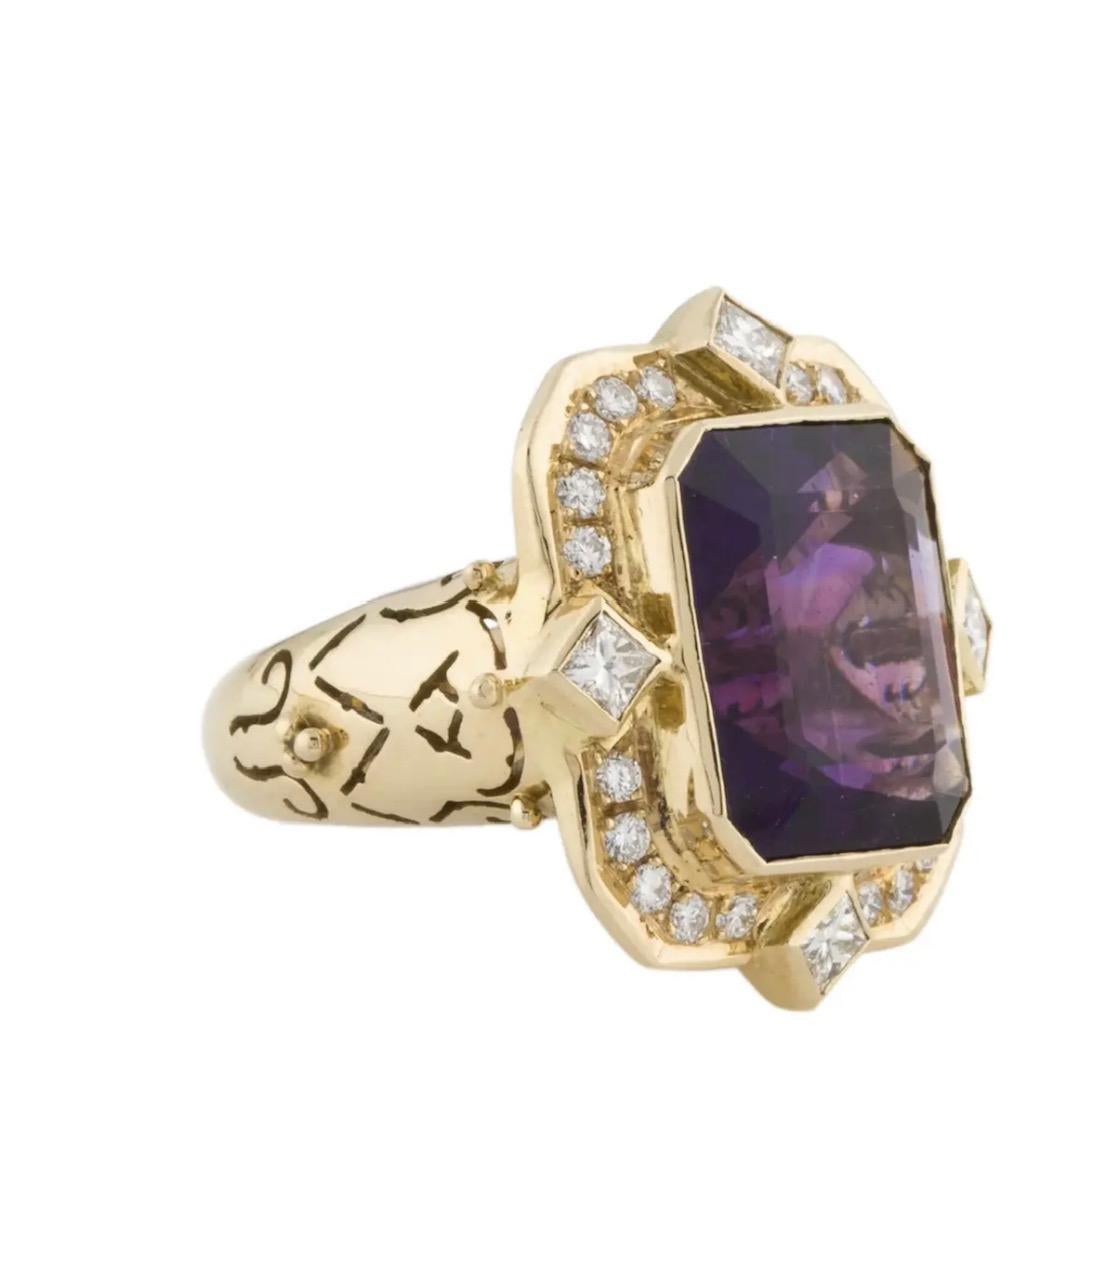 PAULA CREVOSHAY 
18K AMETHYST & DIAMOND RING

Designed and made by a collectible designer. This ring makes a gorgeous presentation.
The amethyst and the diamonds are bright and full of life.  
Don't let it get away!

18K Yellow Gold
Featuring a